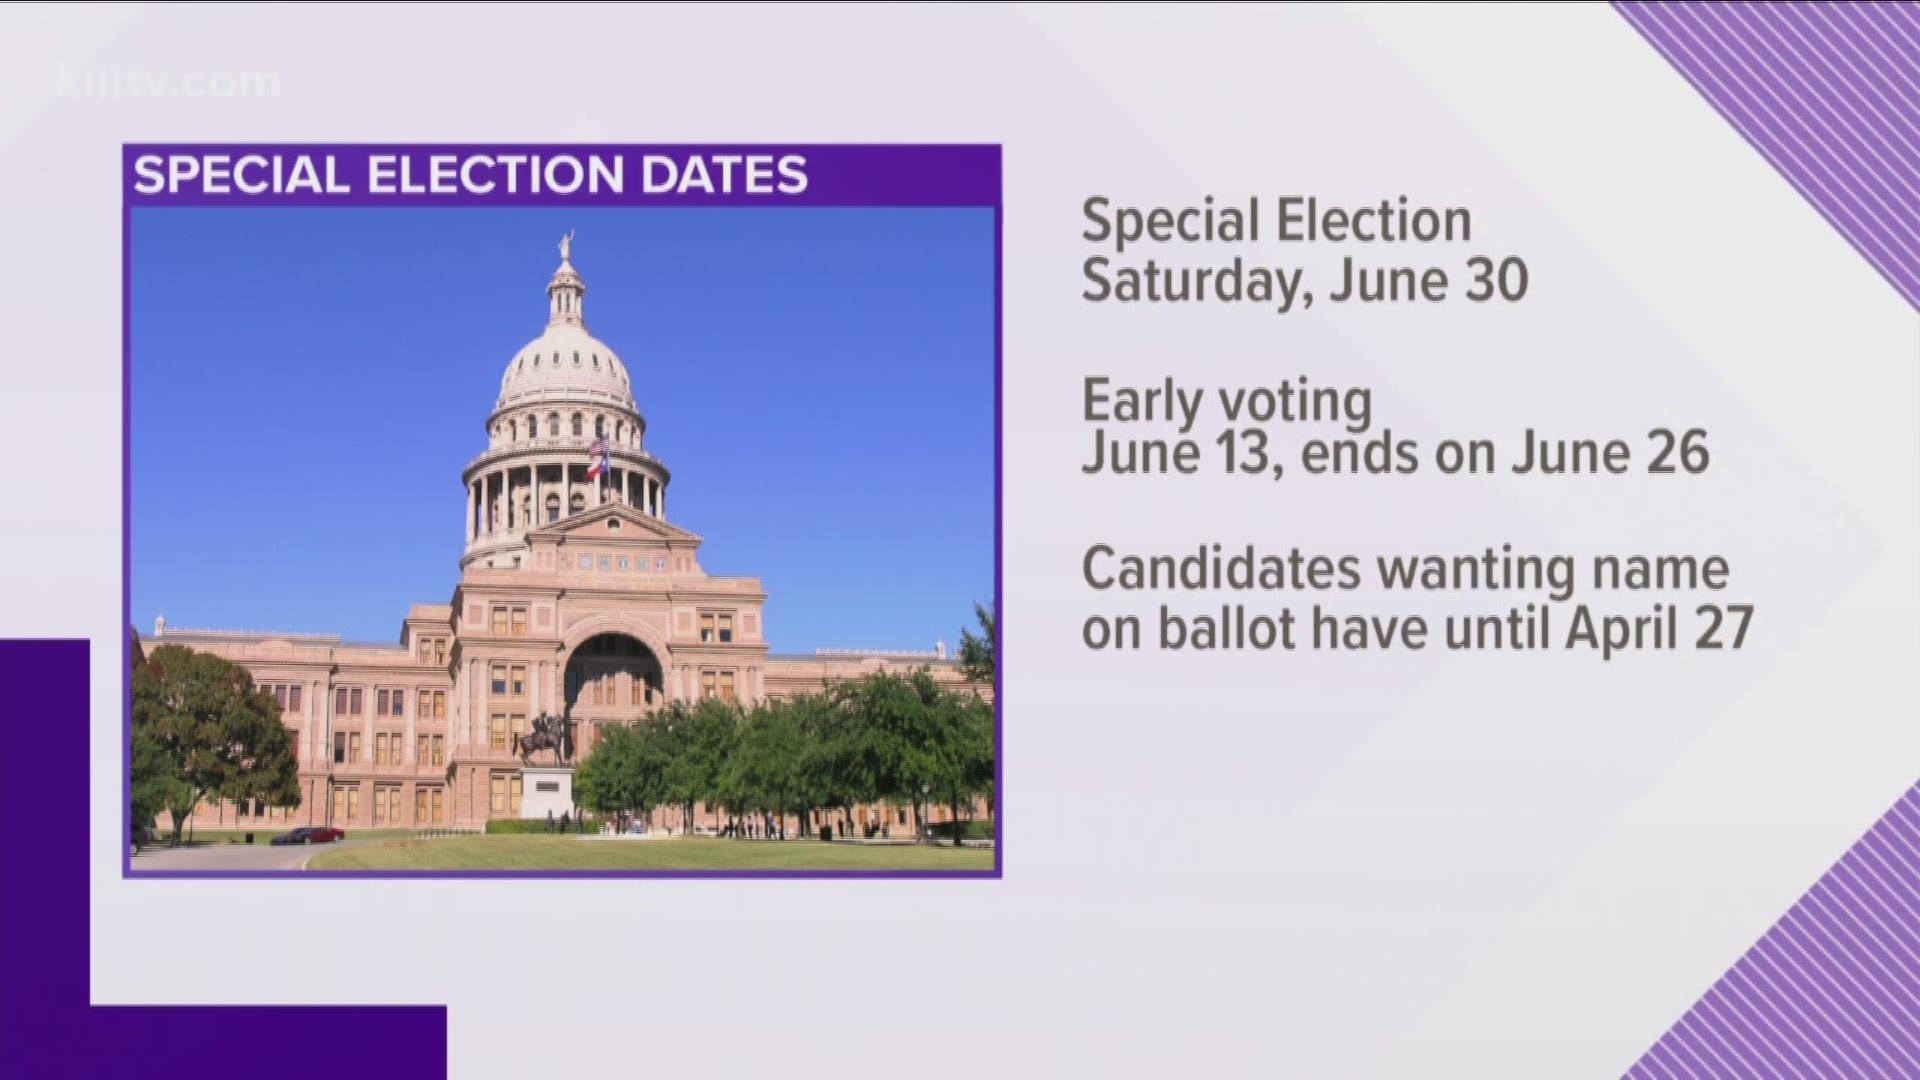 A special election for the Texas Congressional District 27 seat will be held Saturday, June 30. If a runoff election is required, it will likely be held in September.